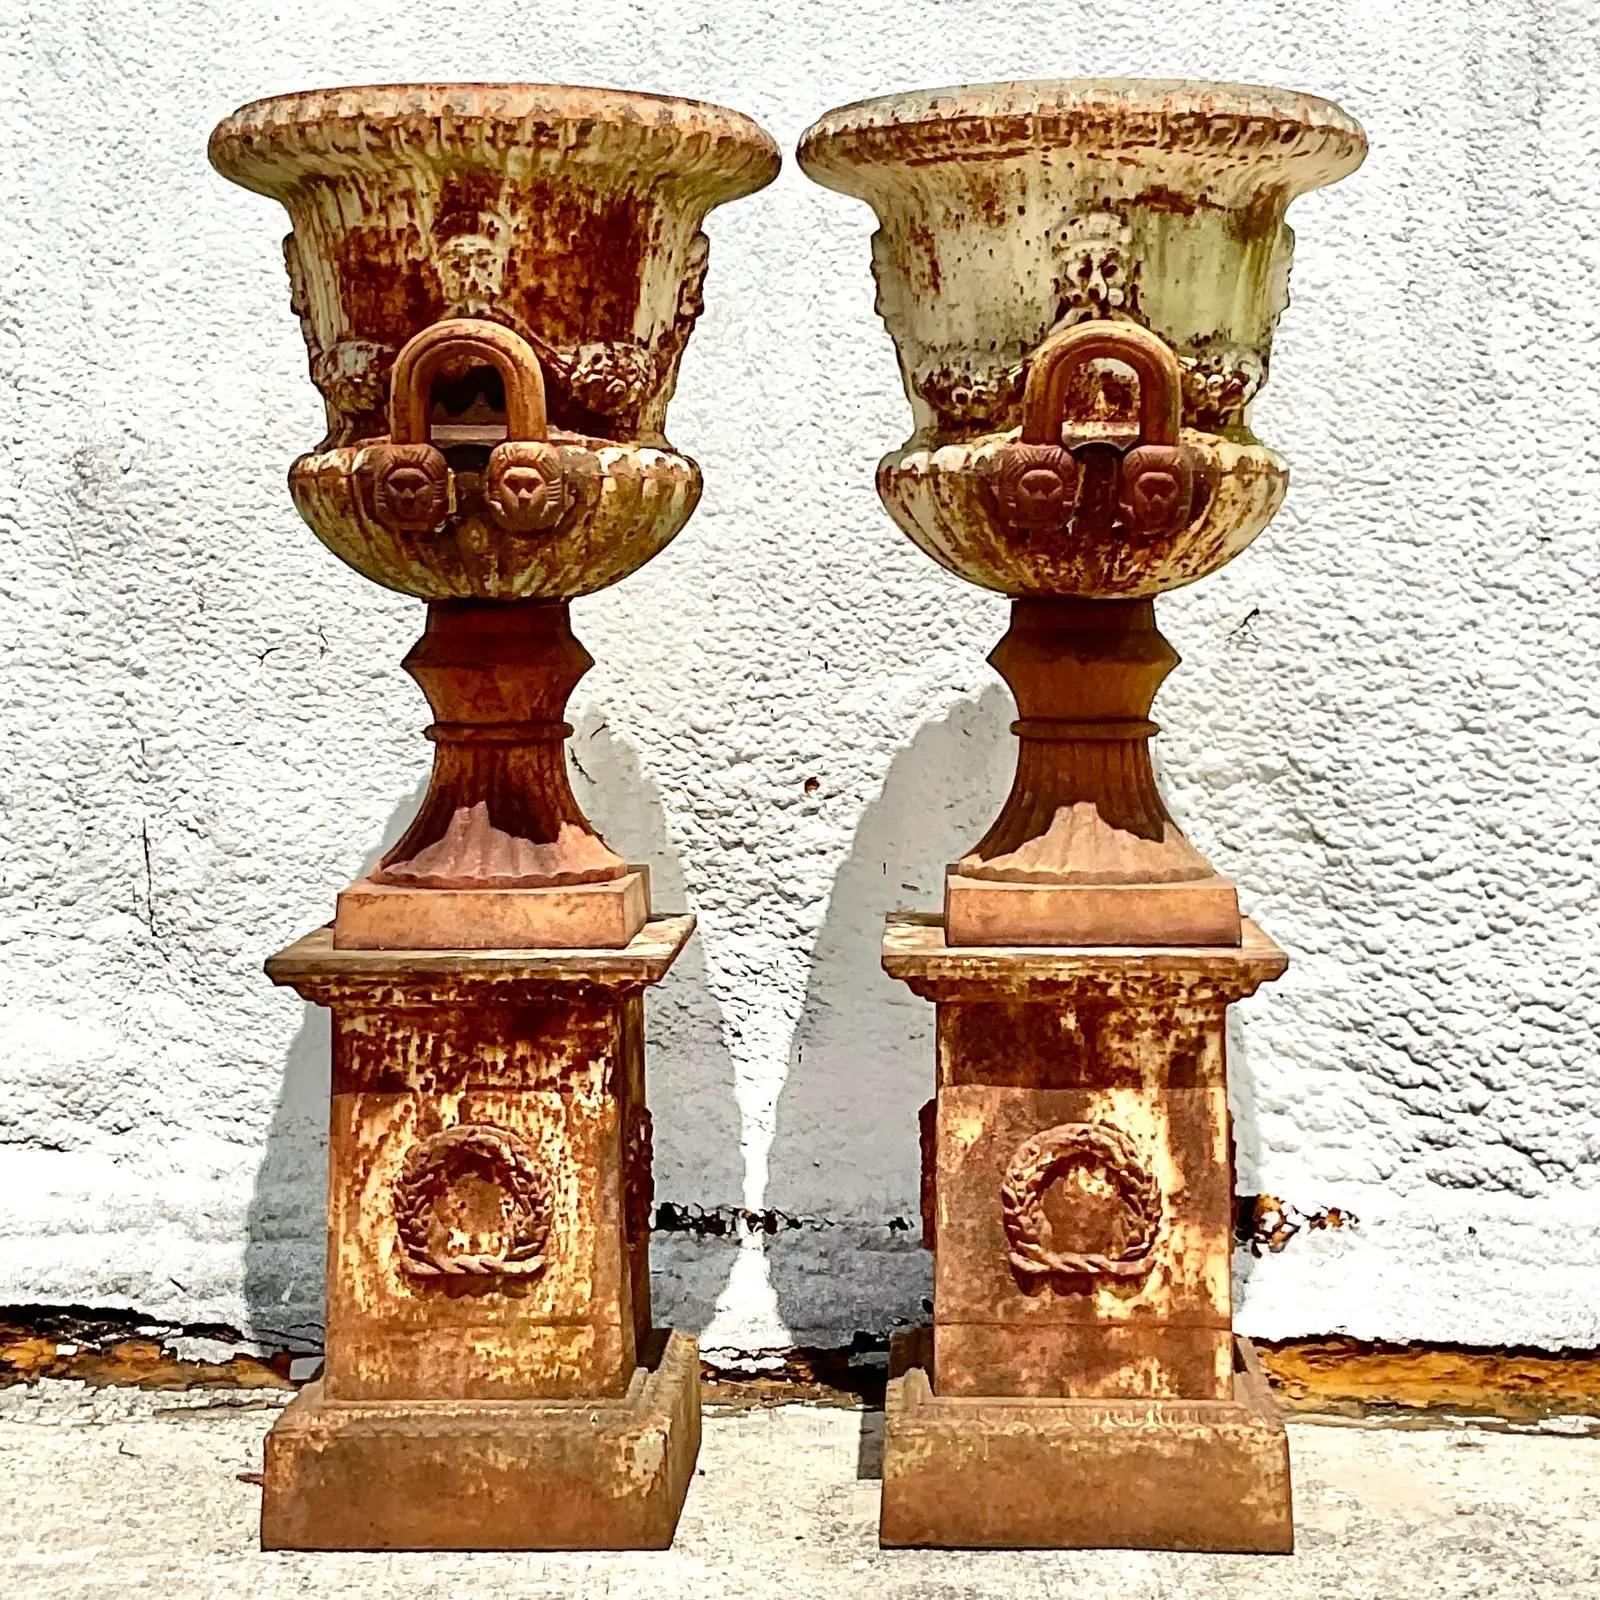 Vintage Monumental Wrought Iron Urns - a Pair For Sale 2